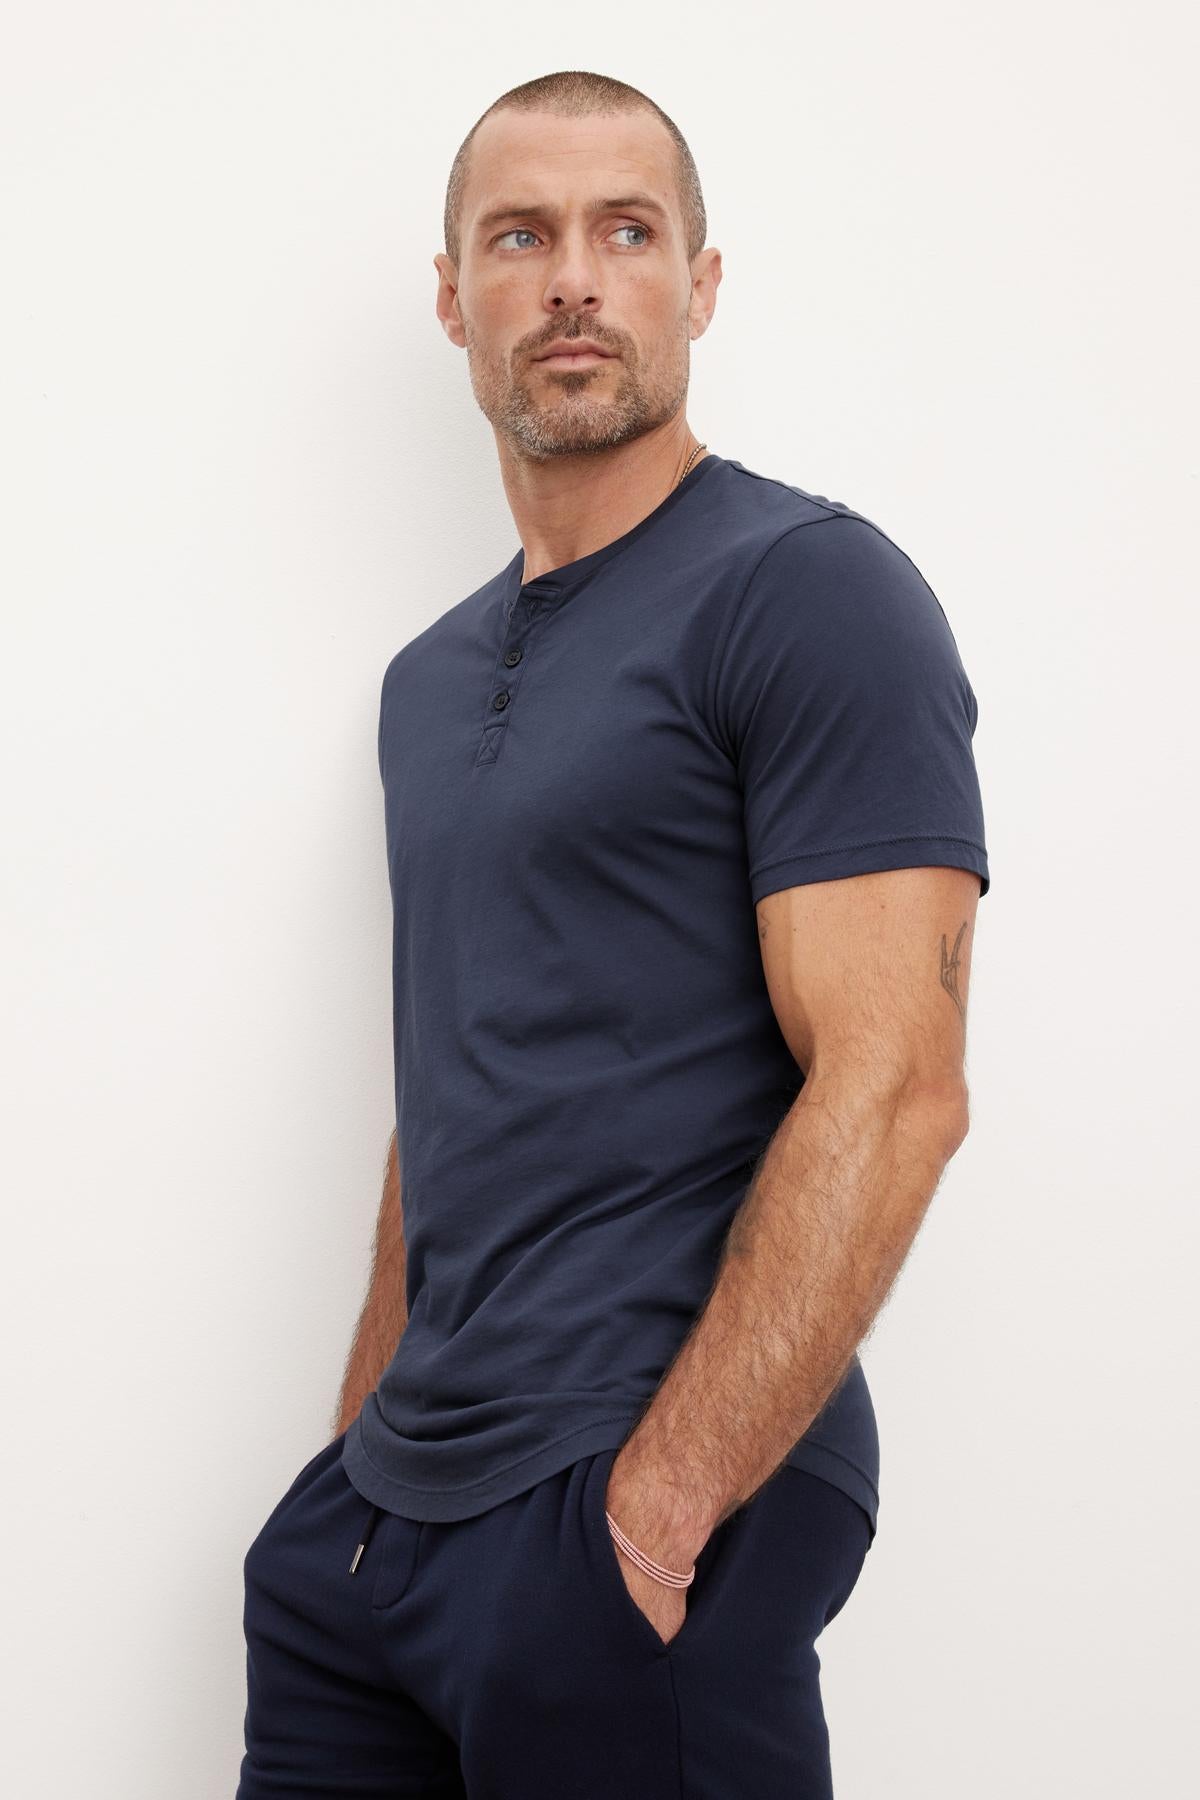 Man in a navy blue Velvet by Graham & Spencer Fulton Henley and pants posing with his hand in his pocket against a white background.-36753531044033